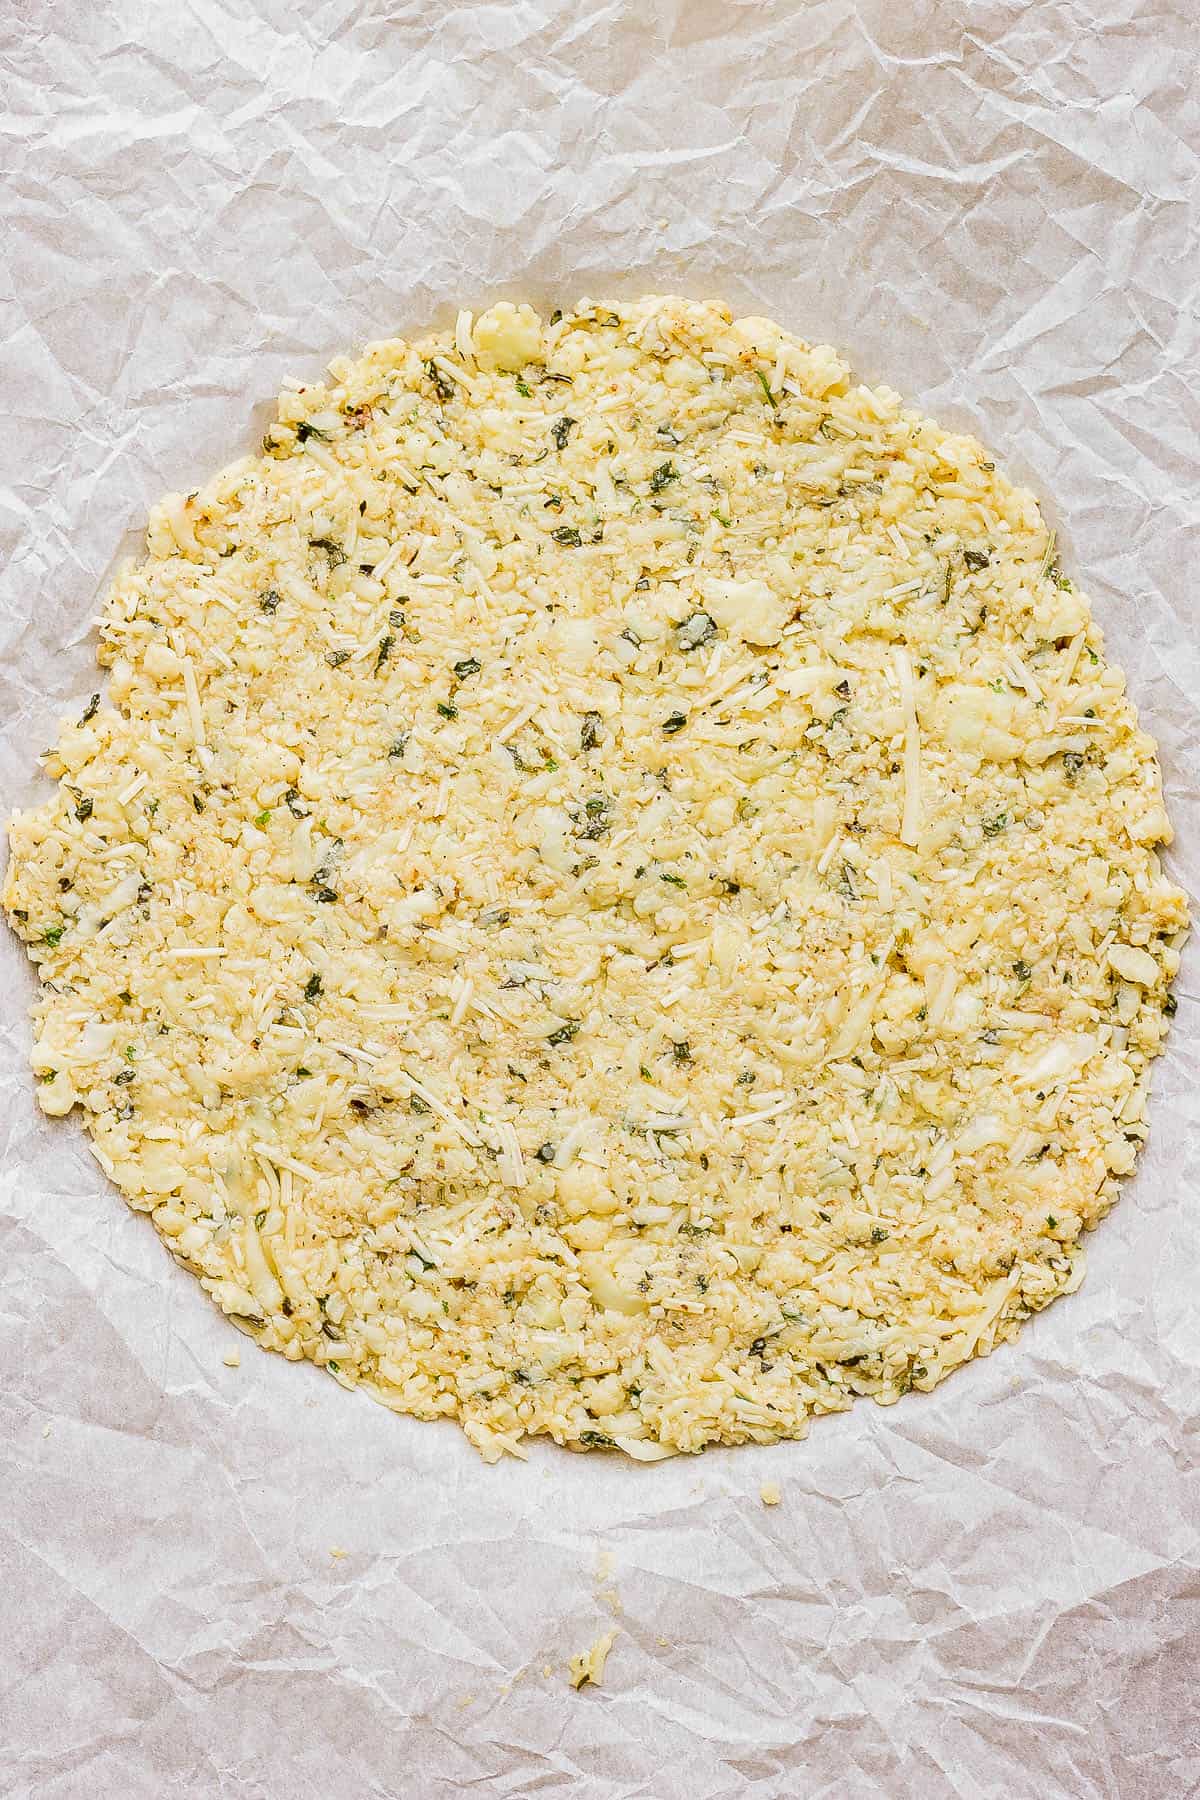 A cauliflower pizza crust before baking on a parchment-lined baking sheet.